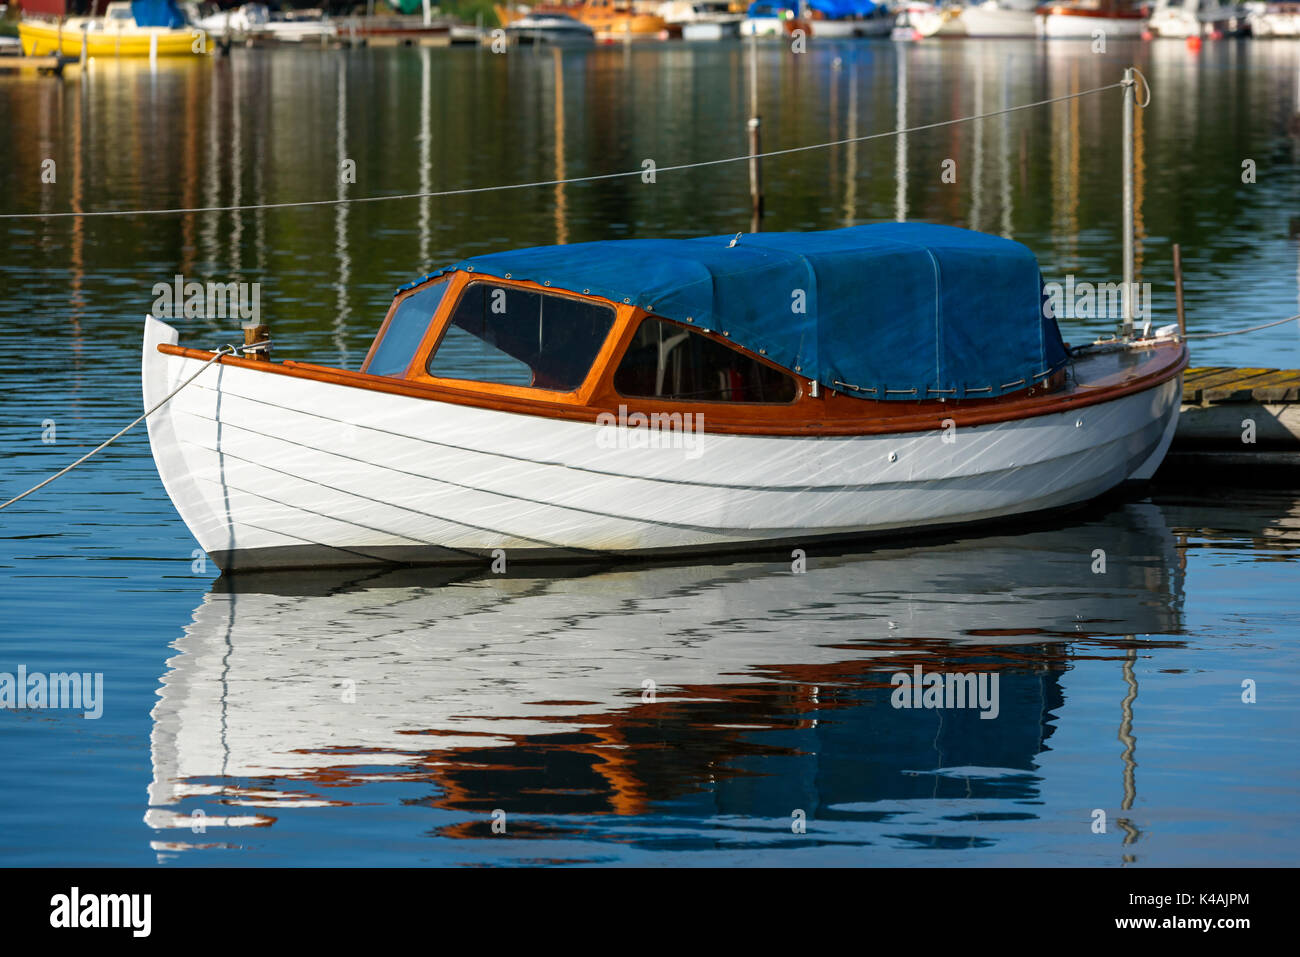 Small white wooden motorboat covered with blue tarp. Boat moored at wooden pier and have rope hanging over it. Stock Photo